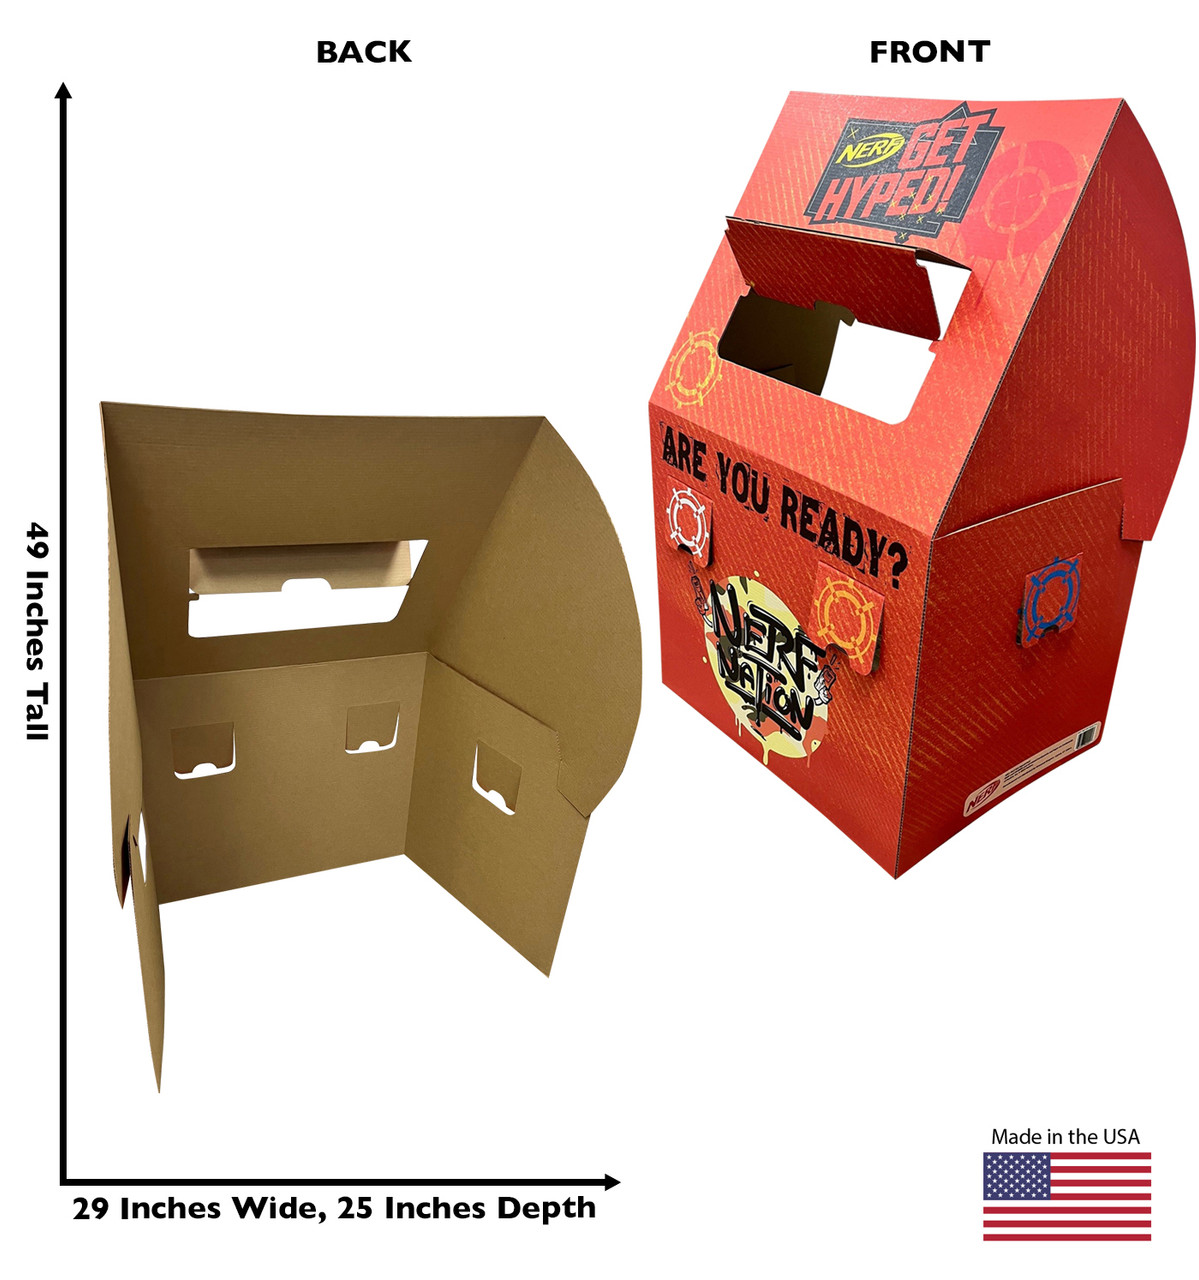 Cardboard Nerf Get Hyped Fort with dimensions